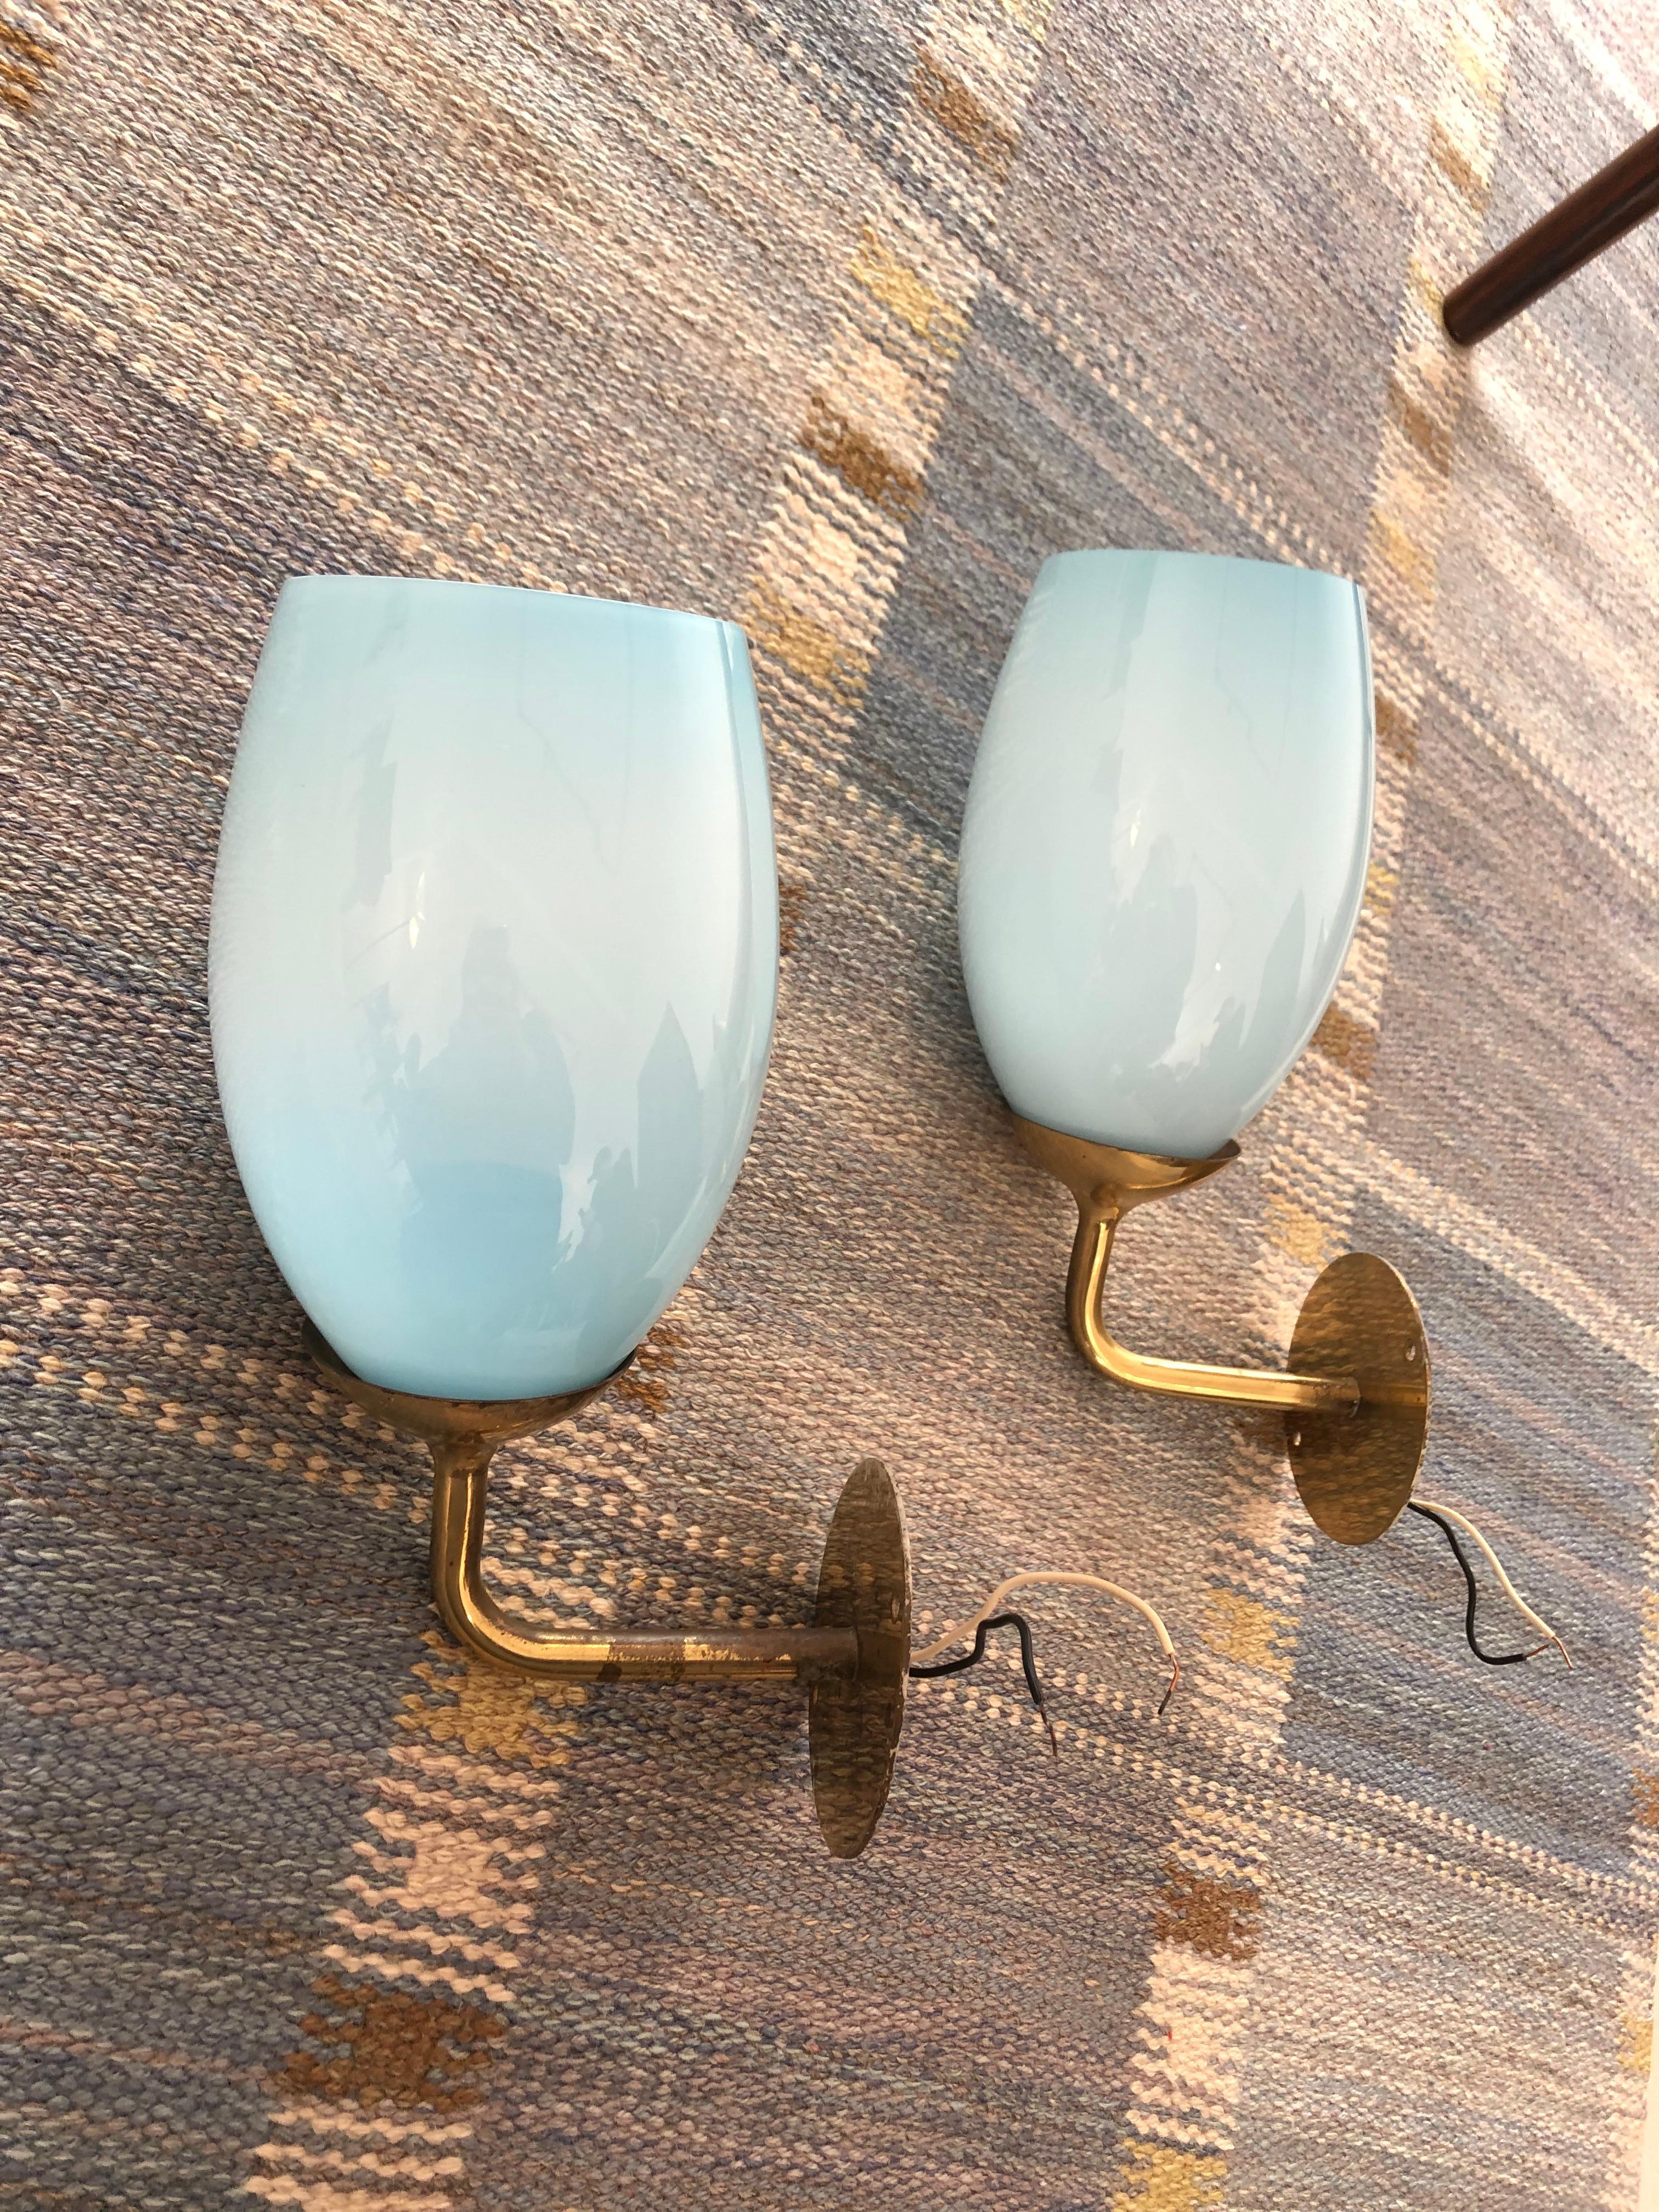 Pair of Paavo Tynell wall lights in brass and light blue glass for Taito Oy, Finland, 1940s.

Provenance: Kontiolax, Finland, 1940s.

Glass is in excellent condition with no chips or cracks.

Price is for the pair of lamps.